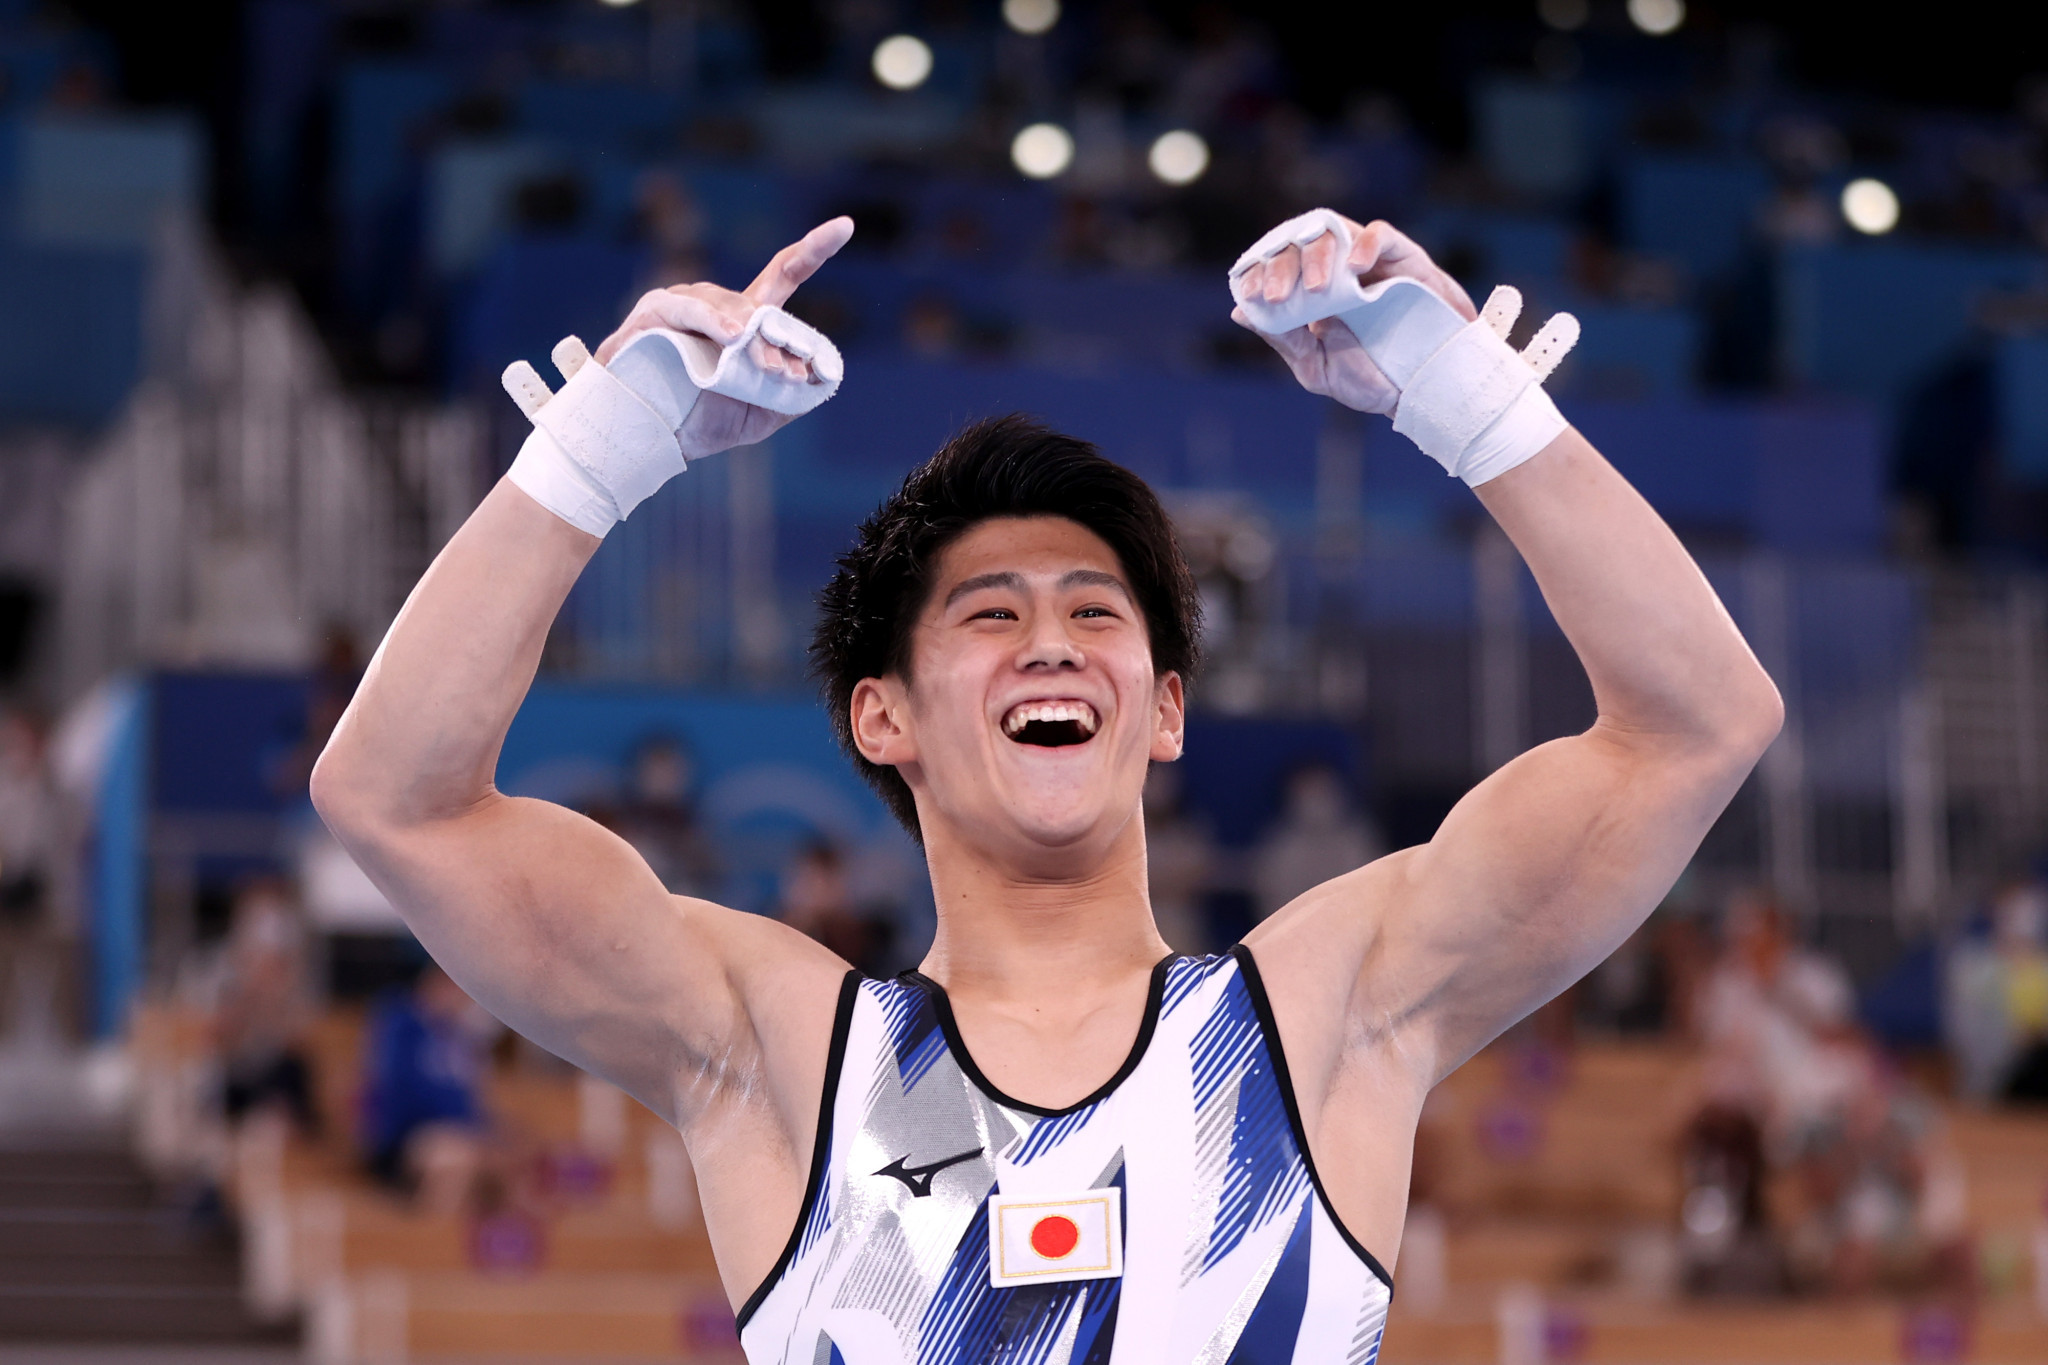 Hashimoto wins dramatic Olympic all-around gold to follow in Uchimura's footsteps